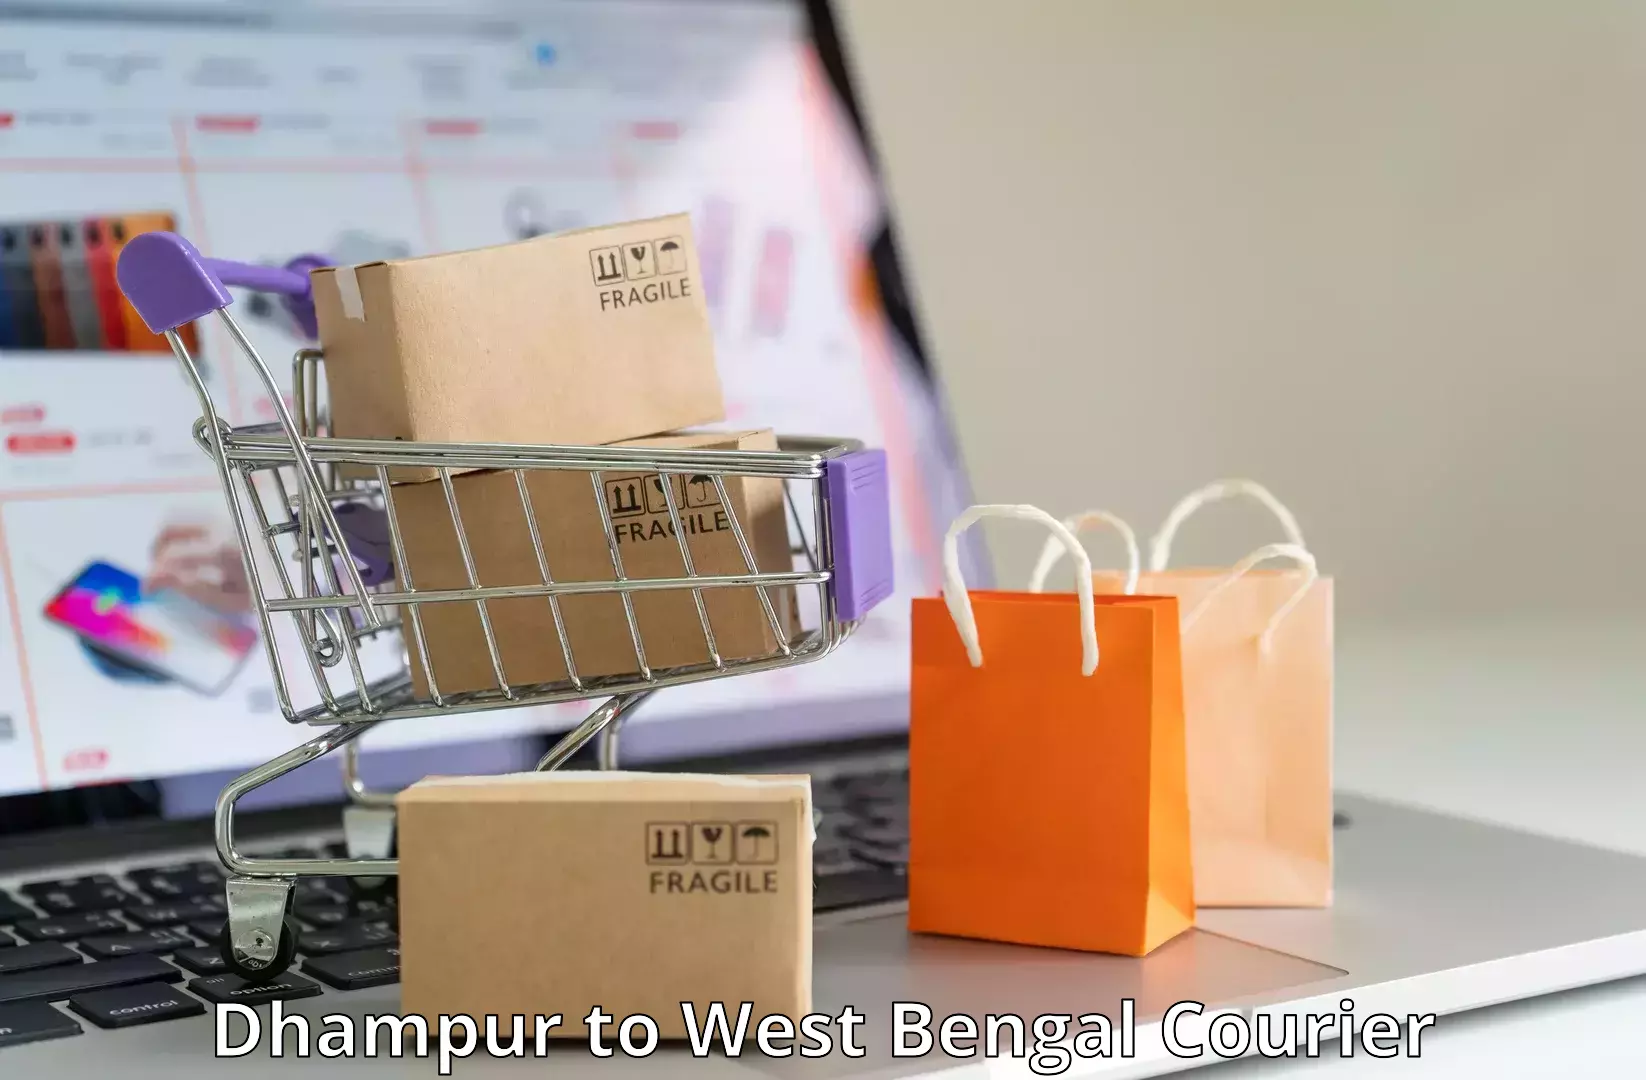 E-commerce logistics support Dhampur to Chalsa